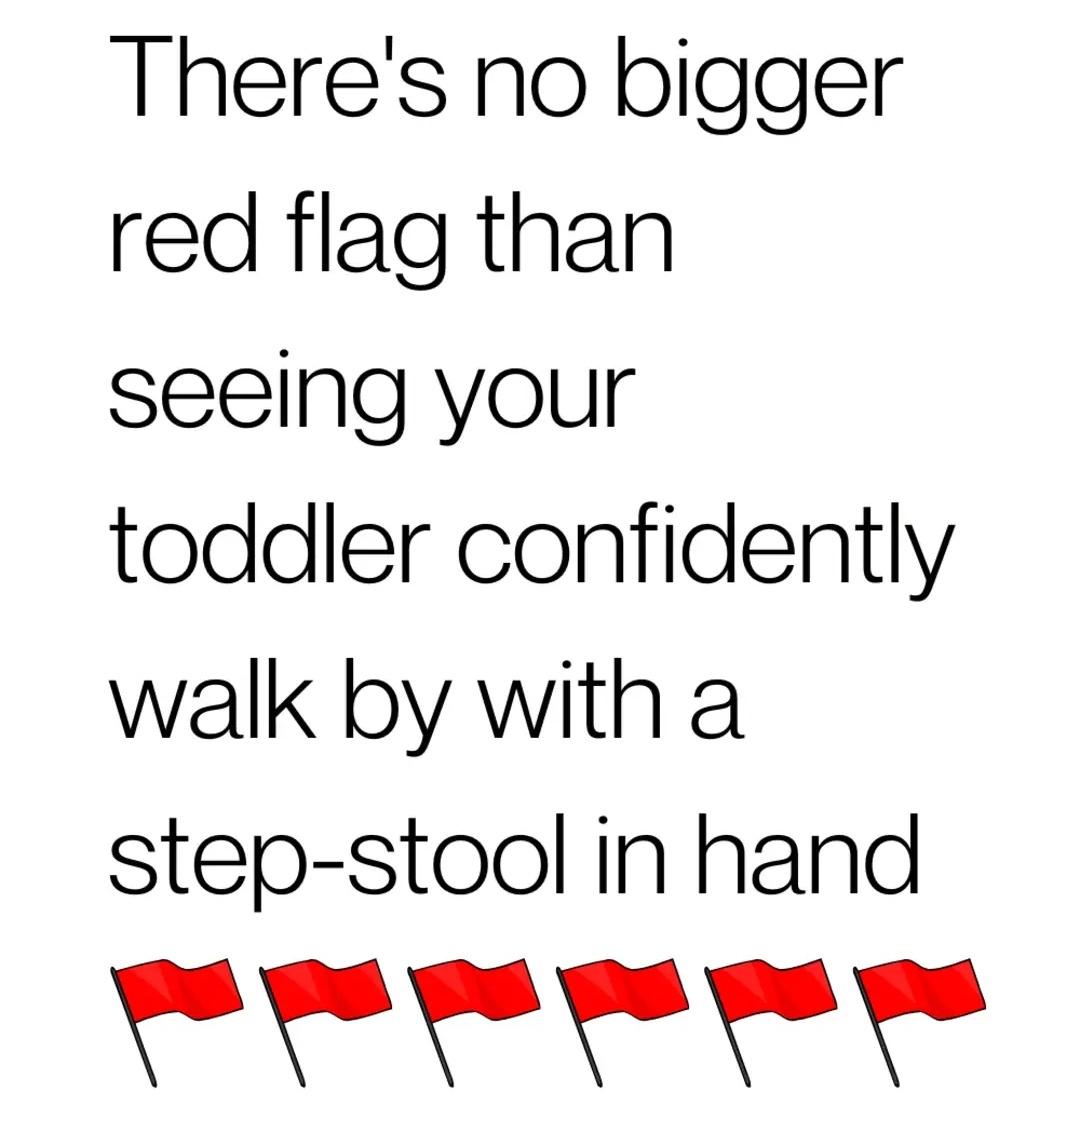 funny memes and pics - angle - There's no bigger red flag than seeing your toddler confidently walk by with a stepstool in hand